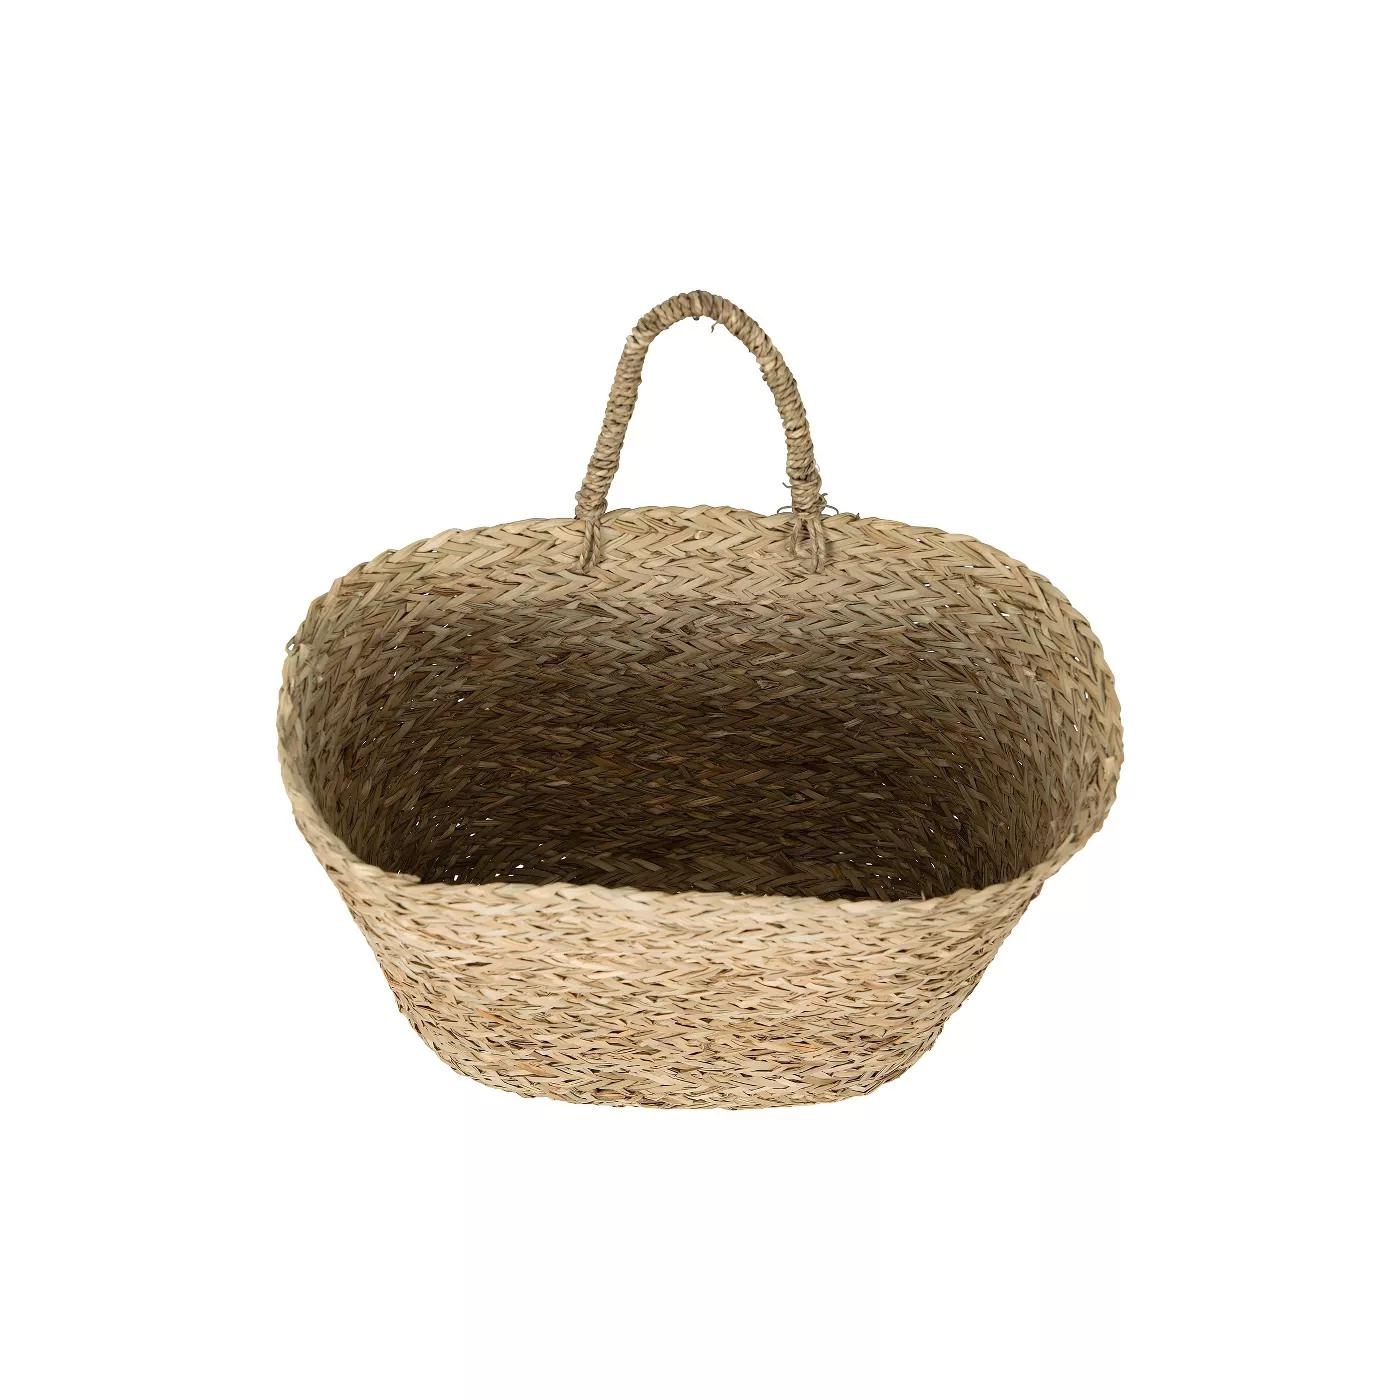 Handwoven Beige Seagrass Wall Baskets (Set of 2 Sizes) - Image 3